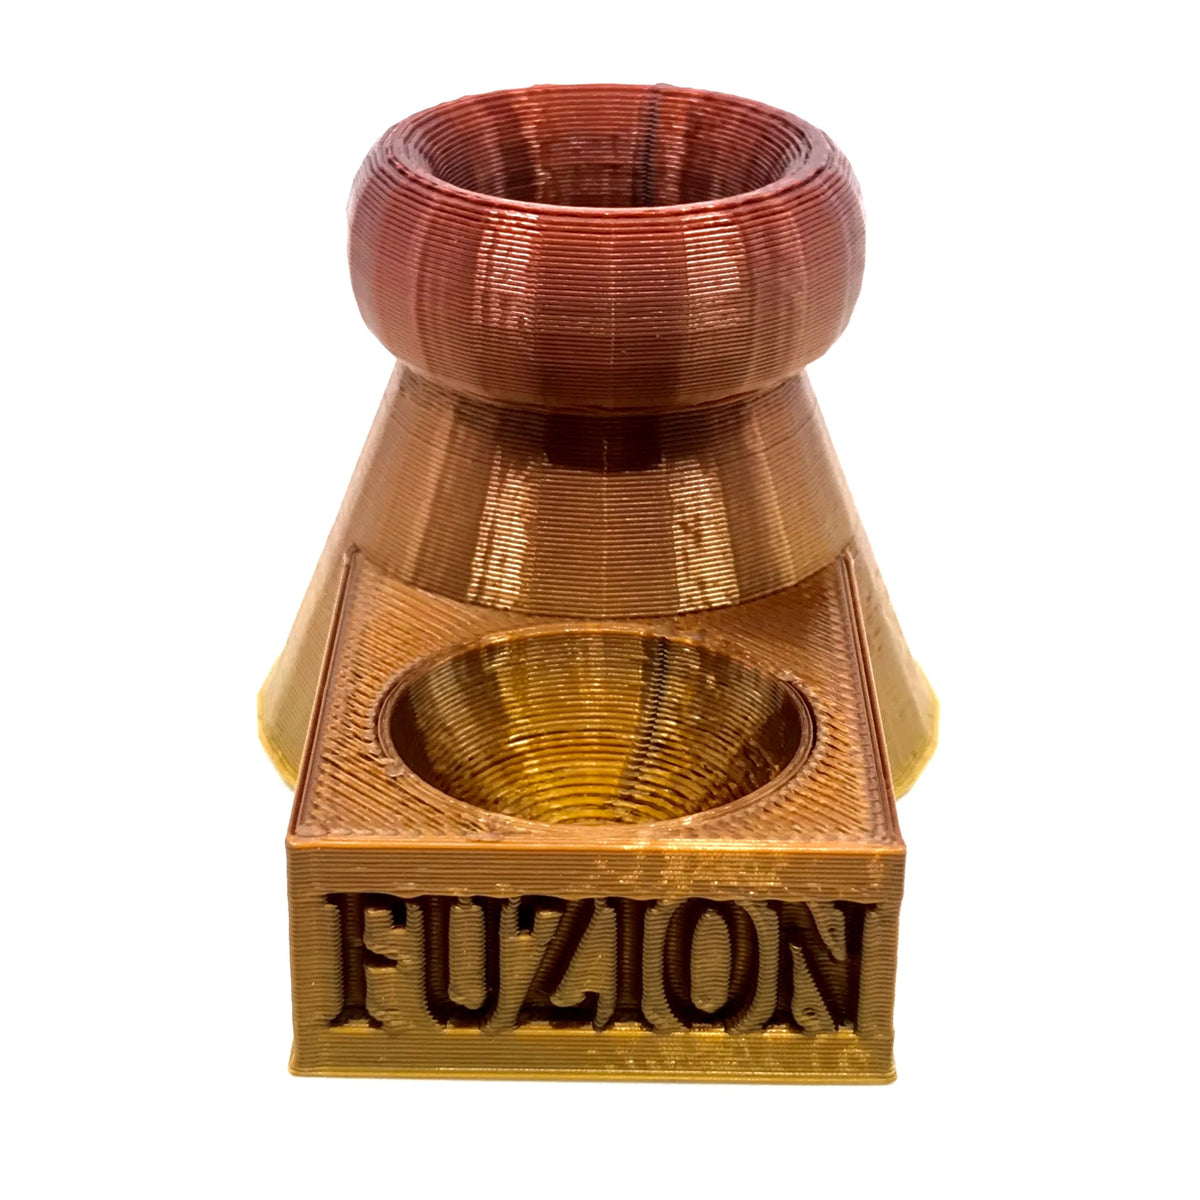 FUZION 3D Printed Bubble Cap and Terp Pearl Stand (Red Gold) show variants 